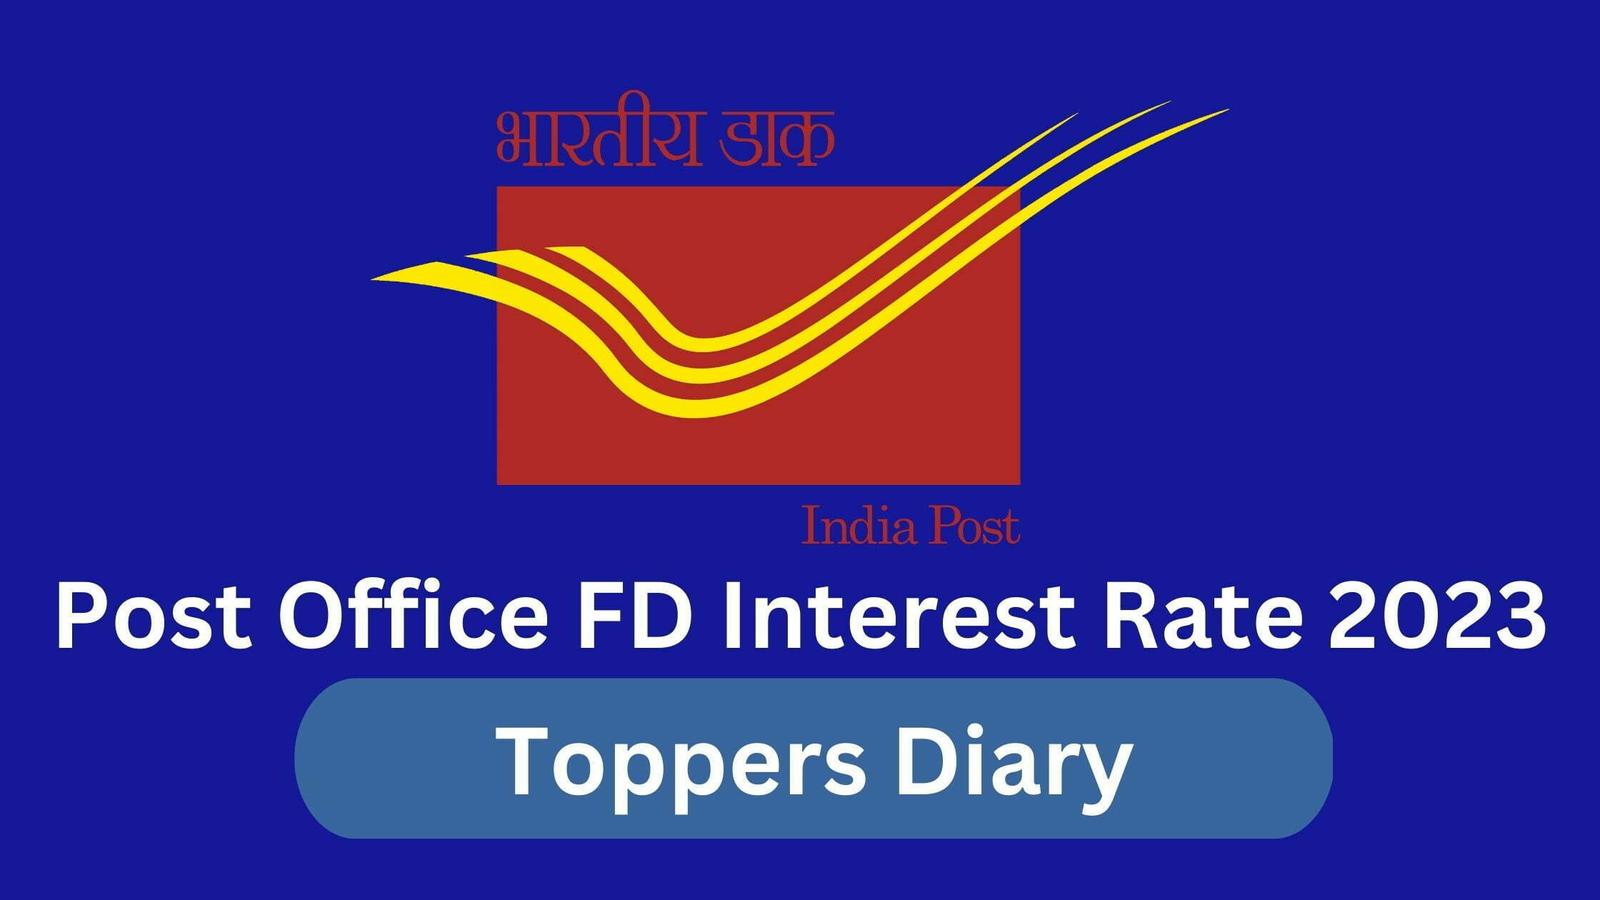 Post Office Fd Interest Rate 2023 Chart Se Smjhe Abhi Toppers Diary 3387